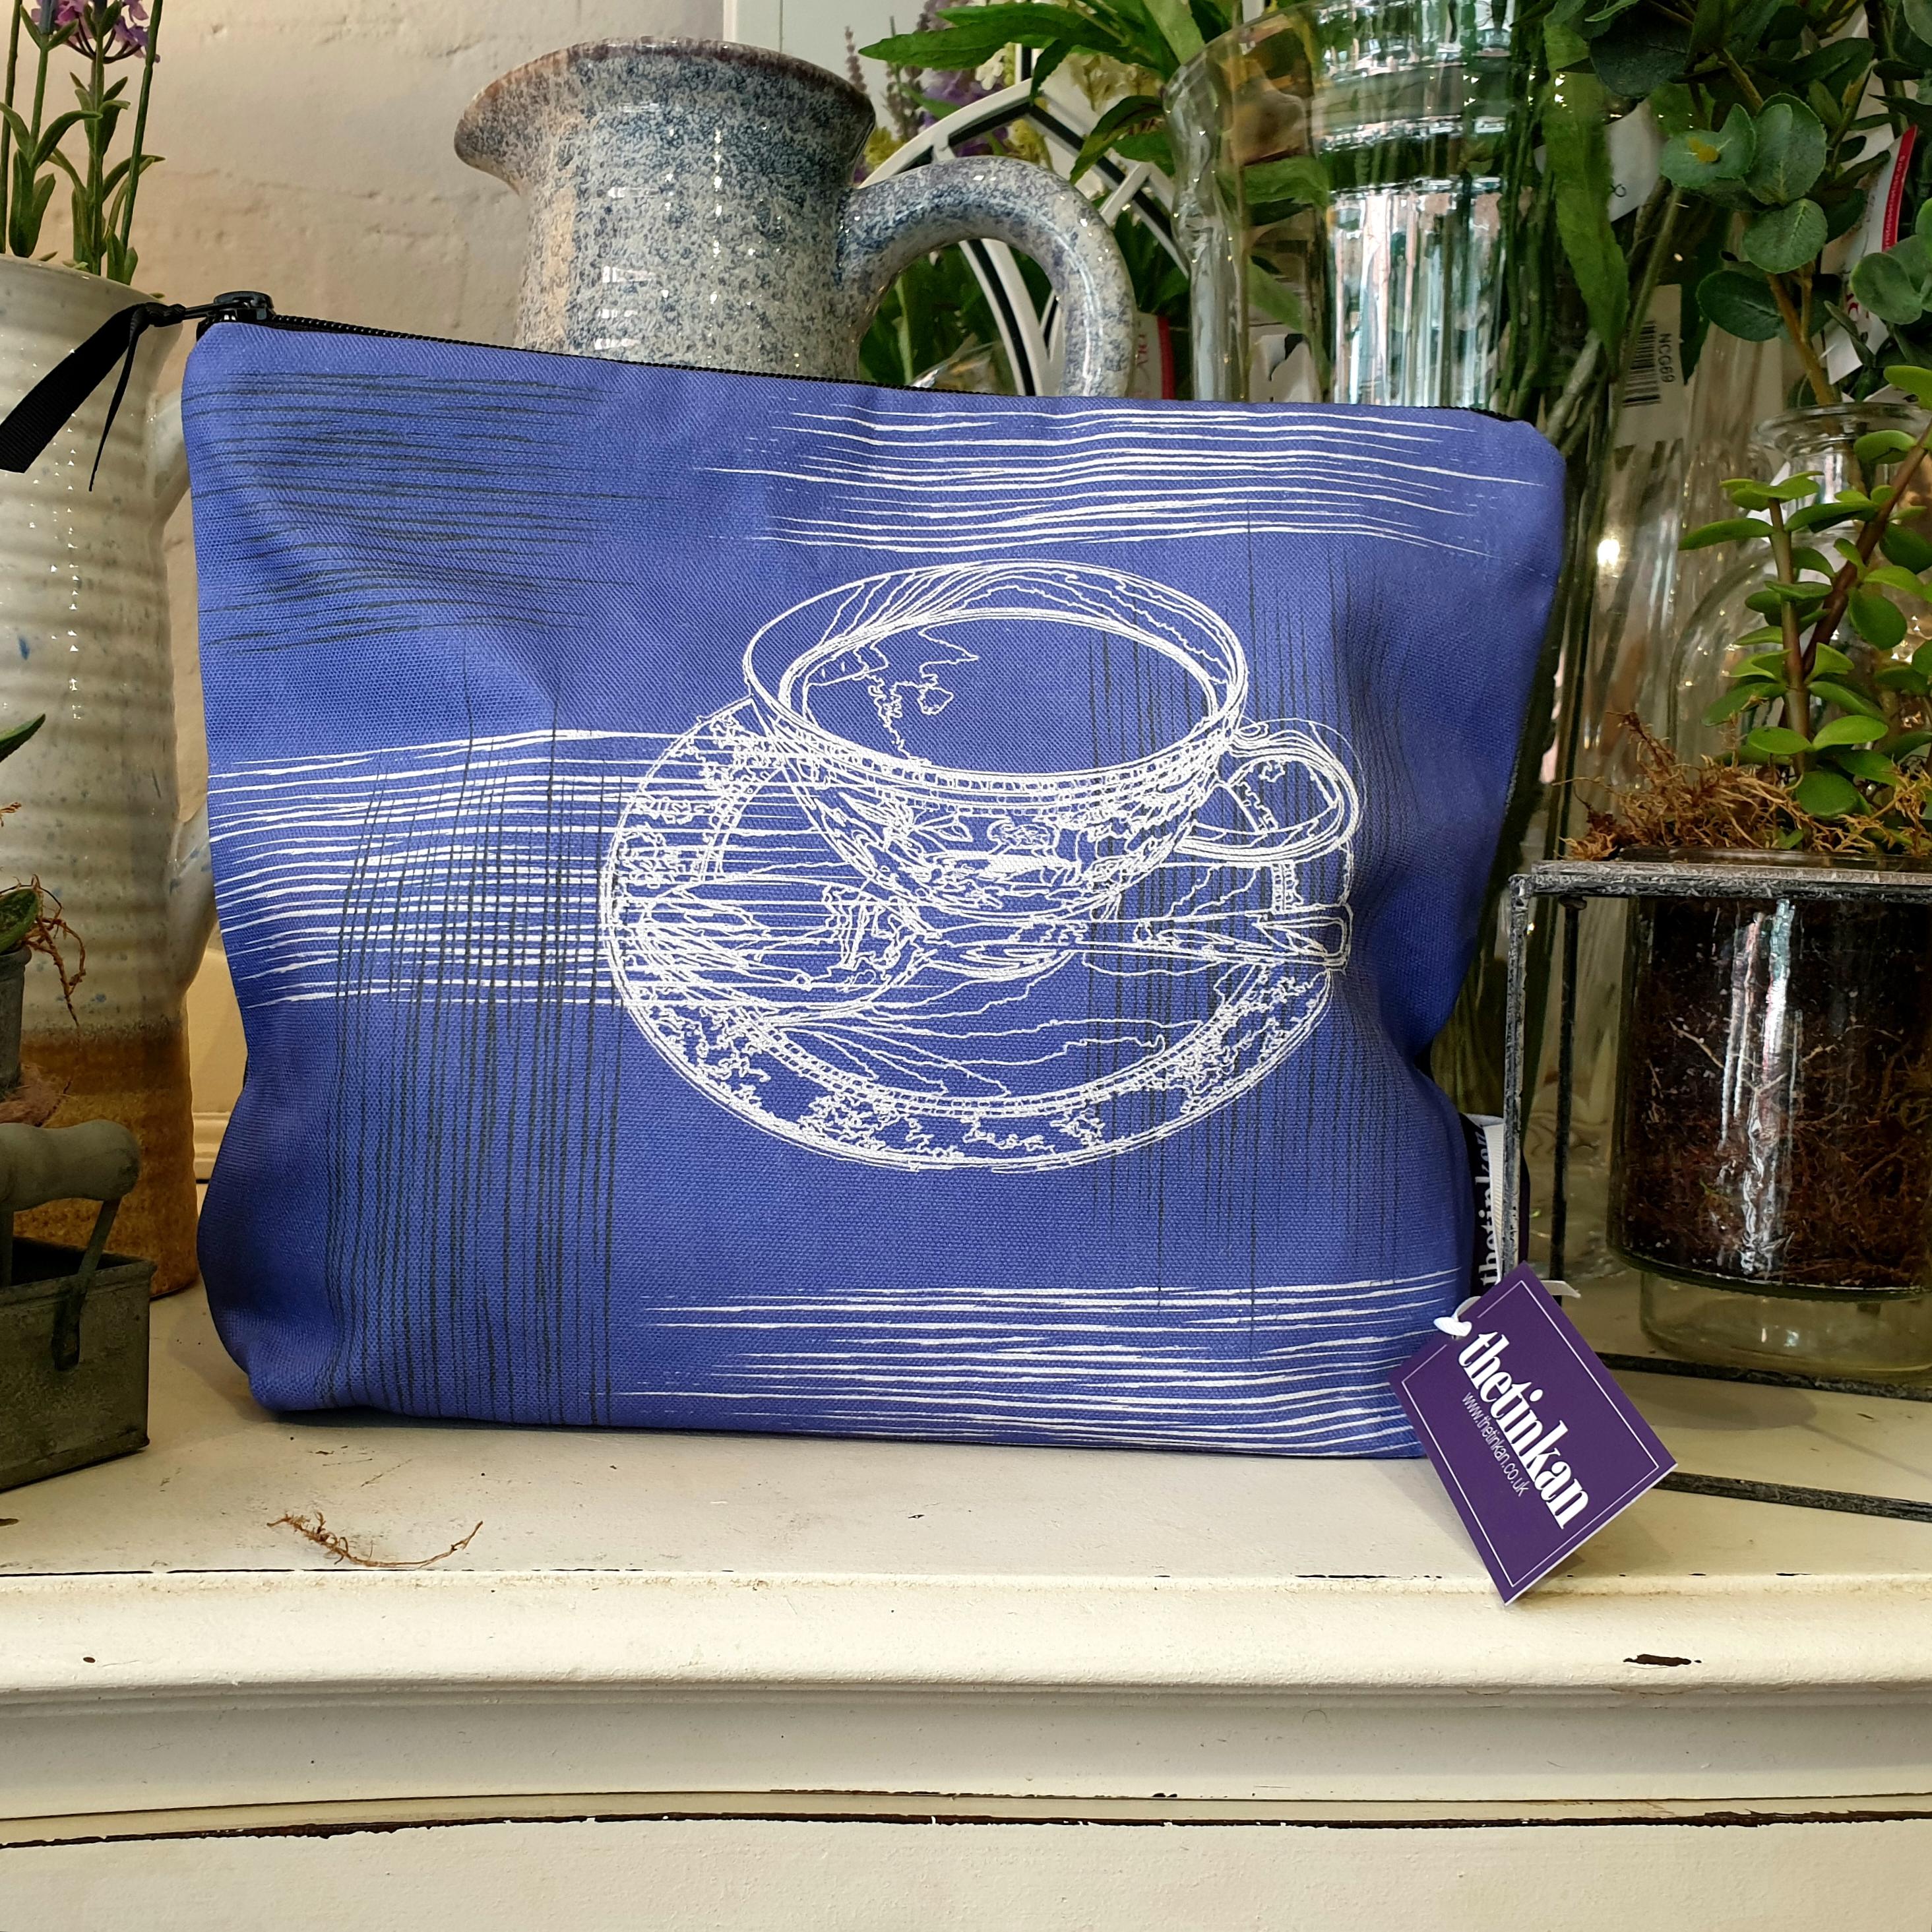 Violet purple with grey coloured reverse, travel beauty washbag featuring the white traced outline of a classic British teacup & saucer. Made from panama cotton with black waterproof lining and matching black sturdy zip. Generously sized for all your travel or home needs. Designed by thetinkan. VIEW PRODUCT >>